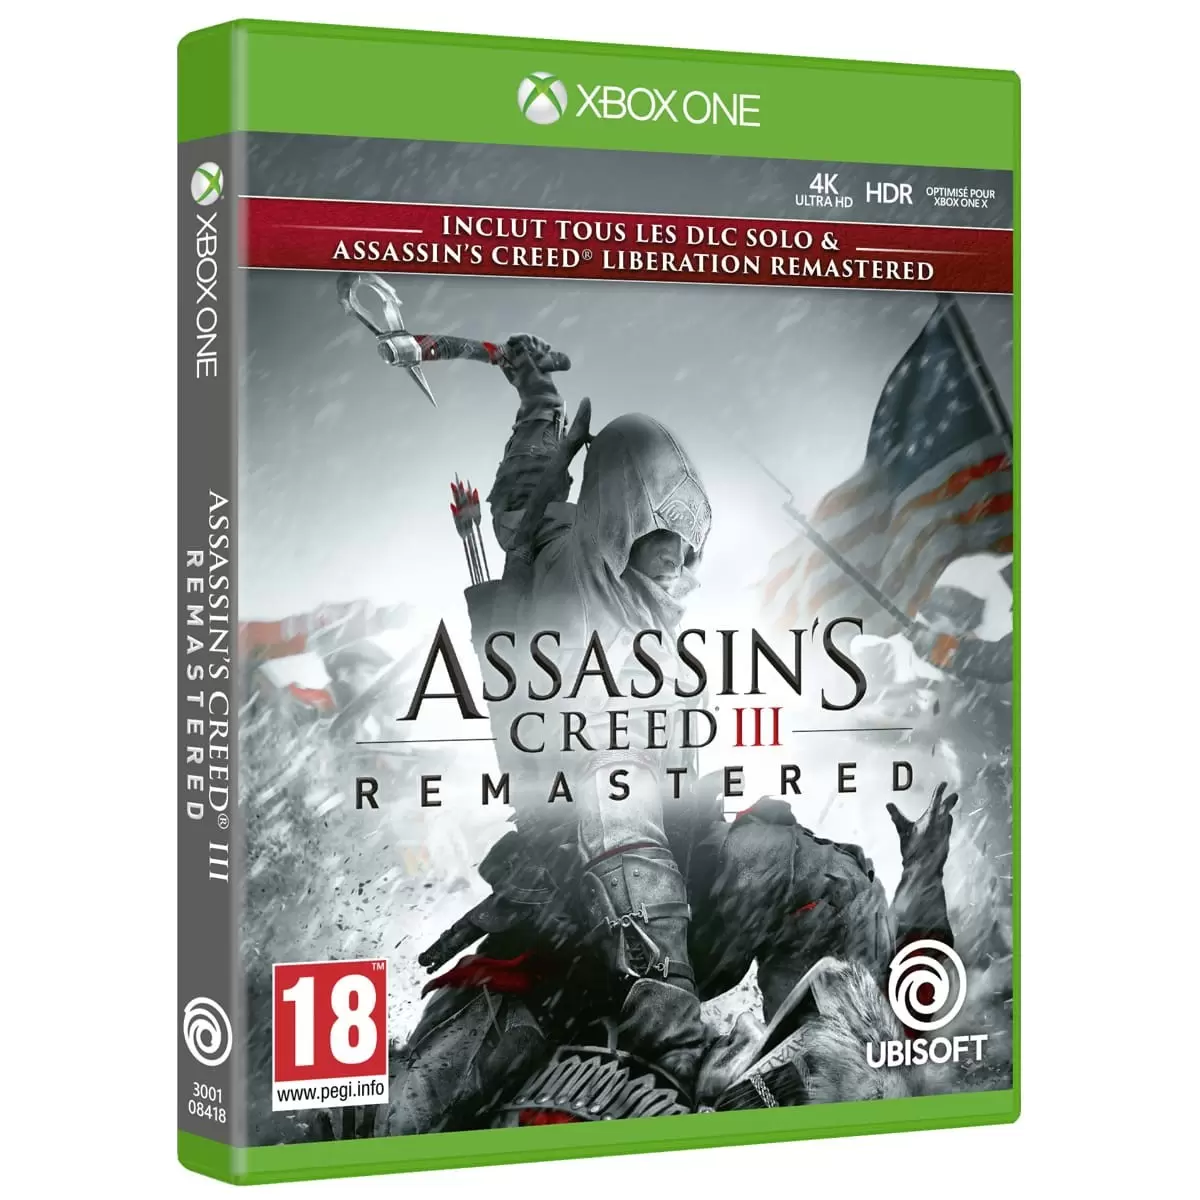 Jeux XBOX One - Assassin\'s Creed 3 + Assassin\'s Creed Libération Remastered